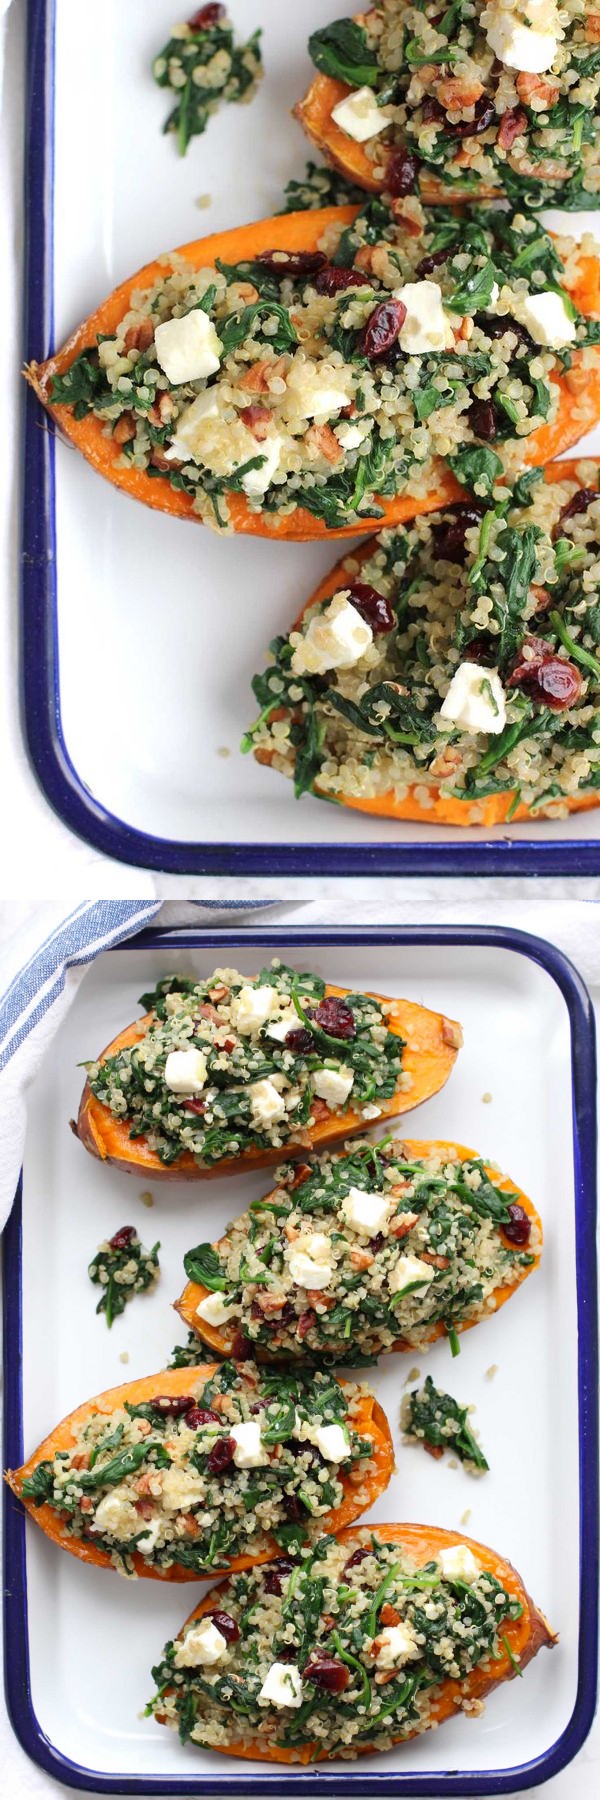 Roasted Sweet Potatoes Stuffed with Quinoa and Spinach